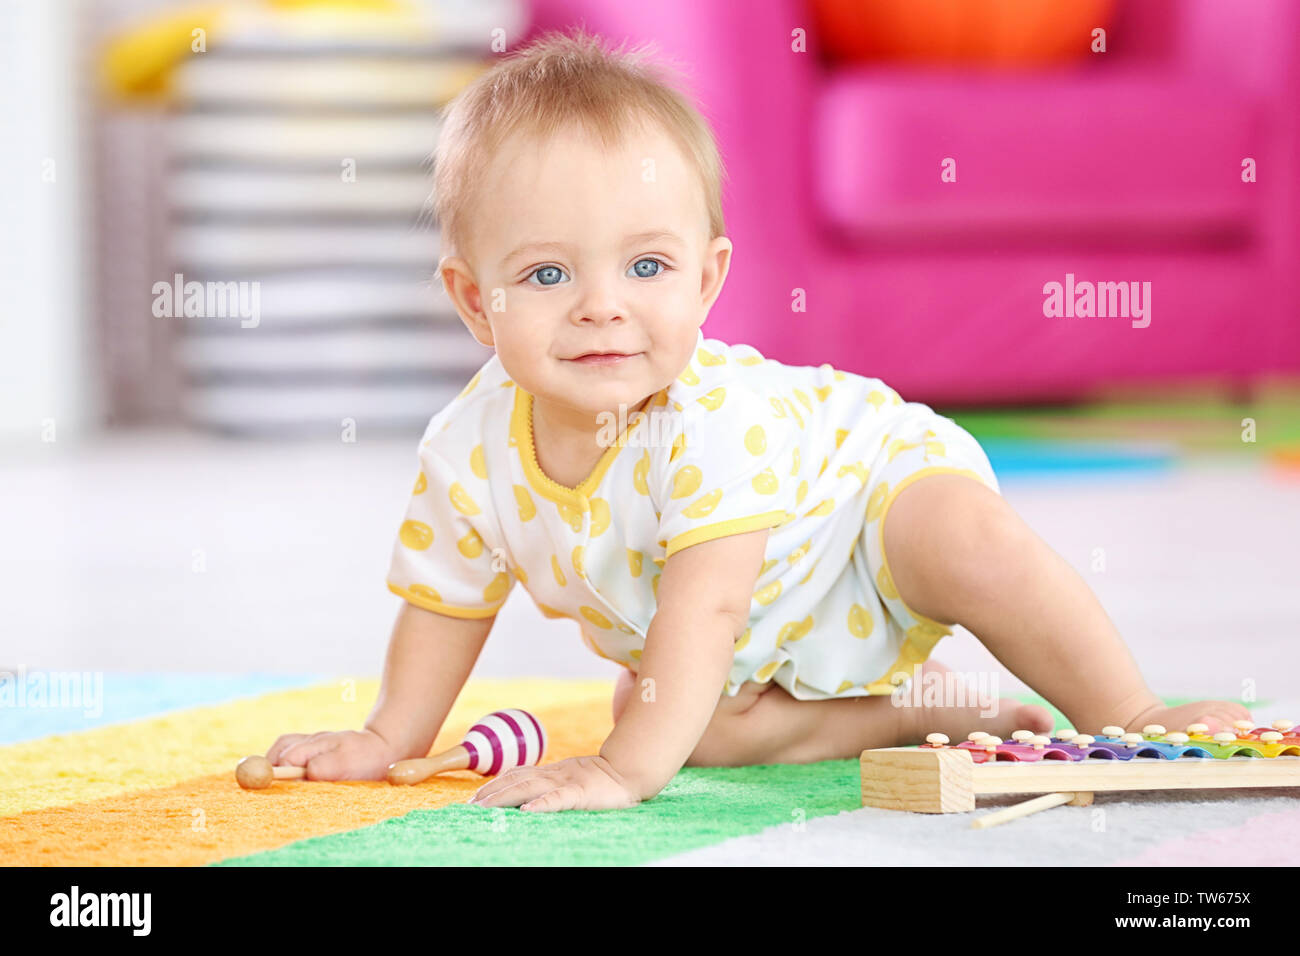 Cute little baby playing with musical instrument at home Stock Photo